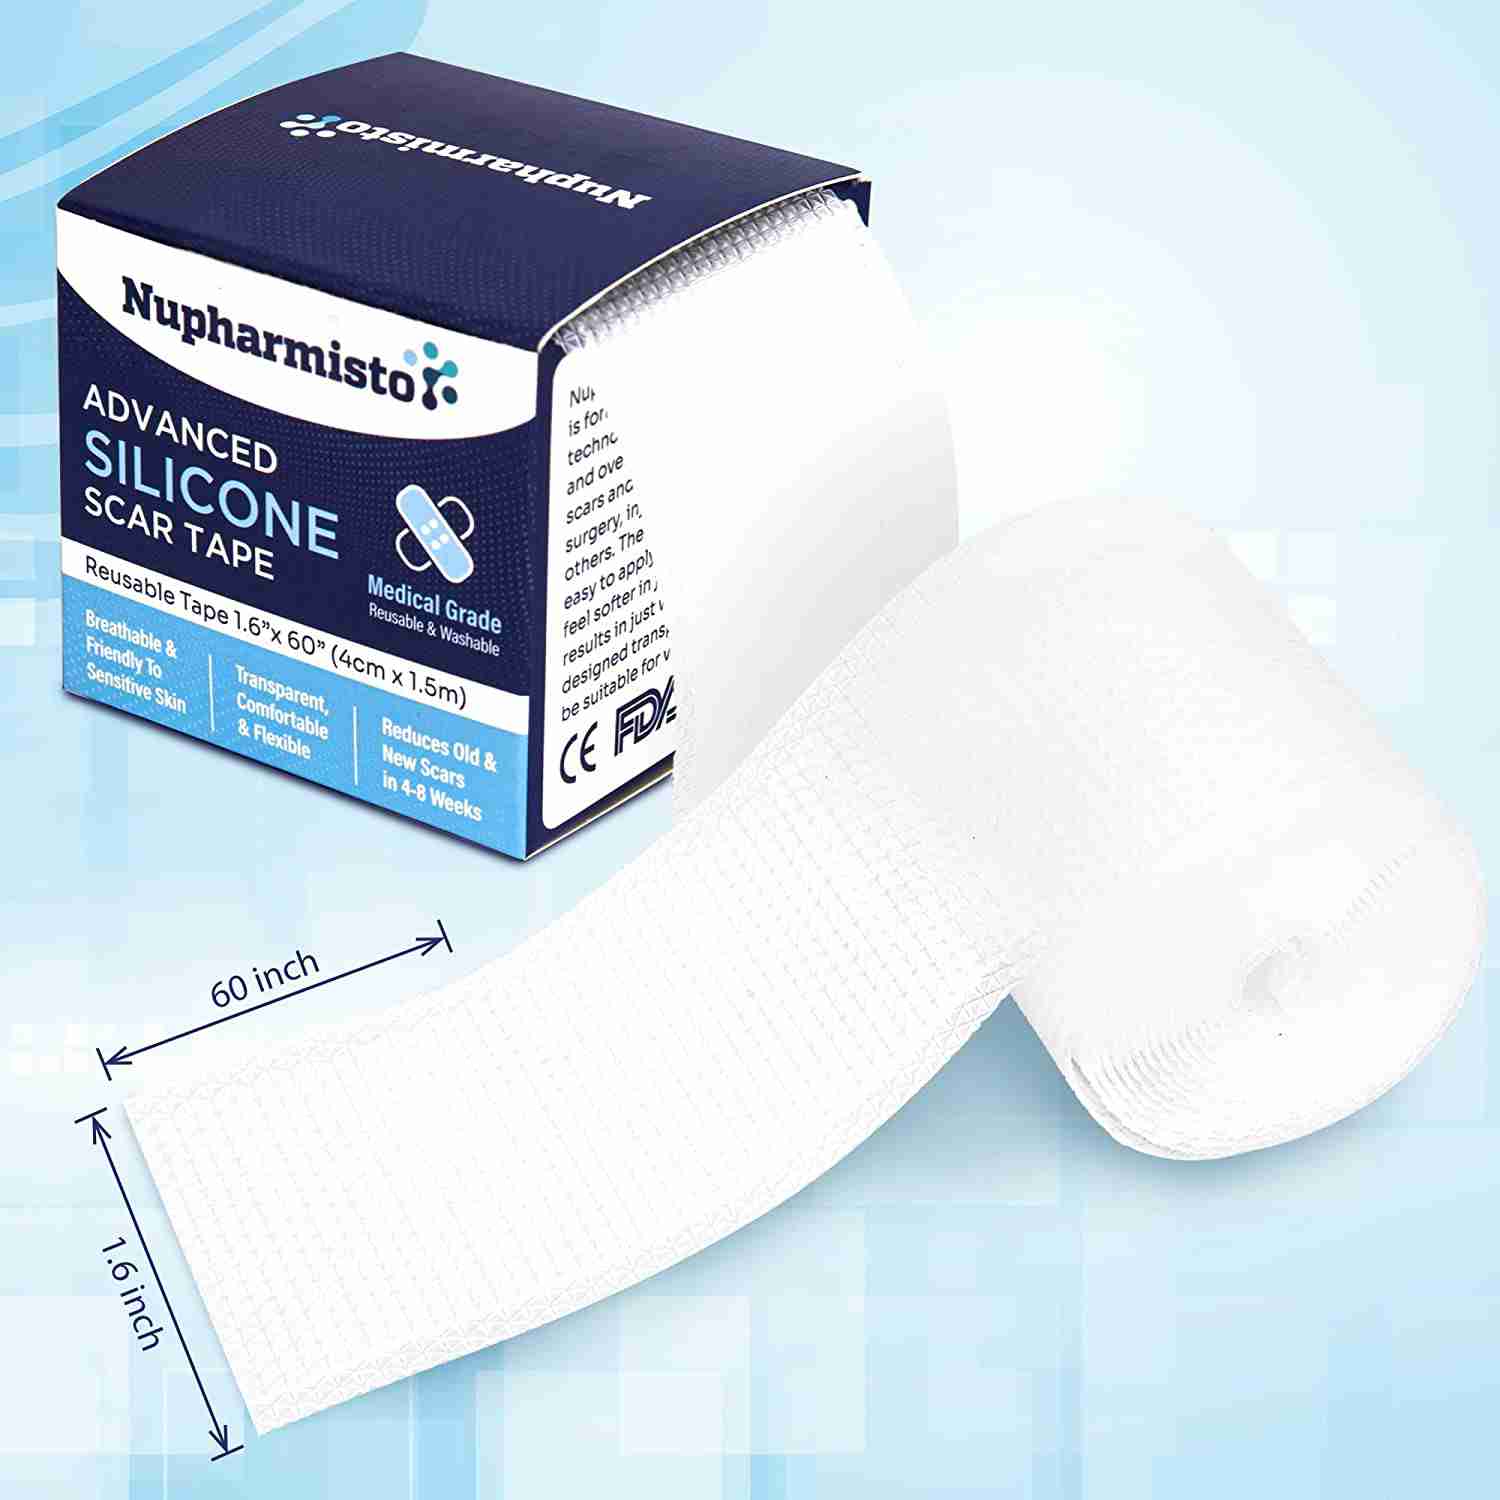 silicone-scar-tape-nupharmisto with discount code